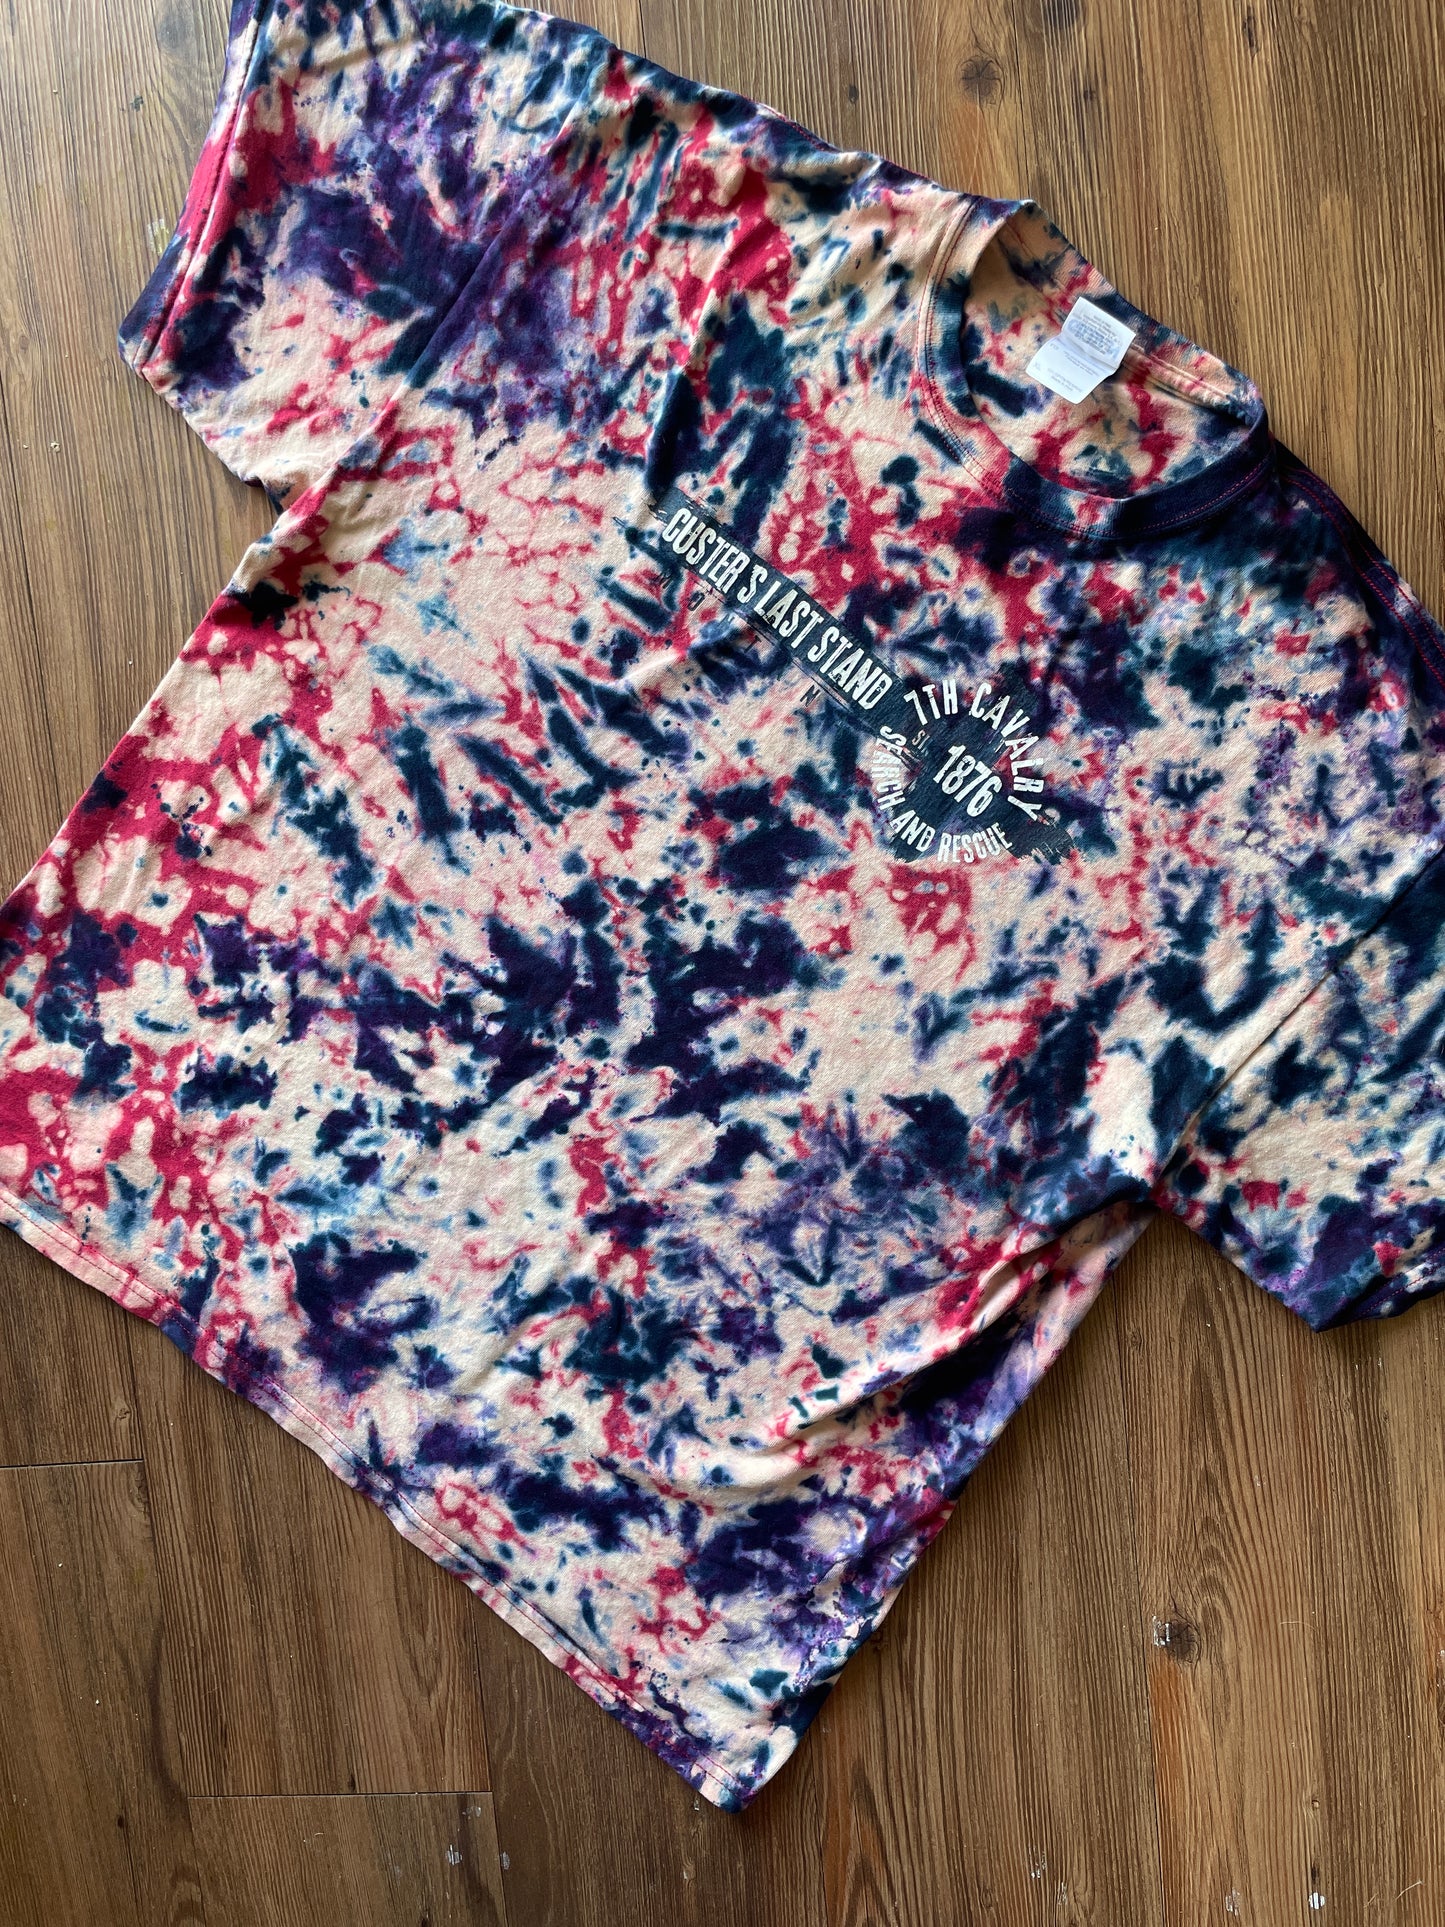 XL Men’s Custer's Last Stand Handmade Reverse Tie Dye T-Shirt | One-Of-a-Kind Red, White, and Blue Bleach Dyed Short Sleeve